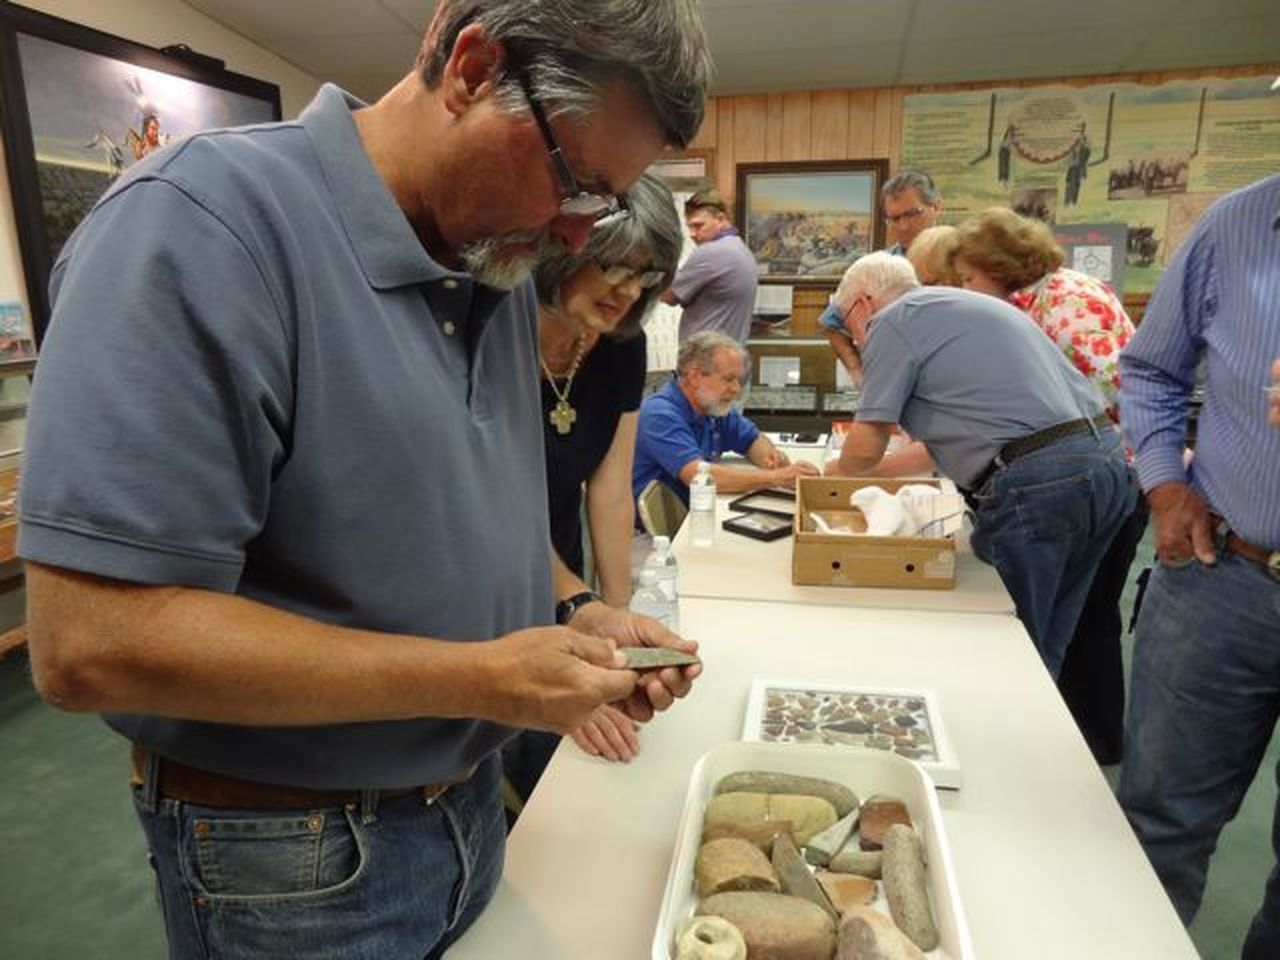 Archaeological experts Rick Day and Paul Katz at the artifact table.